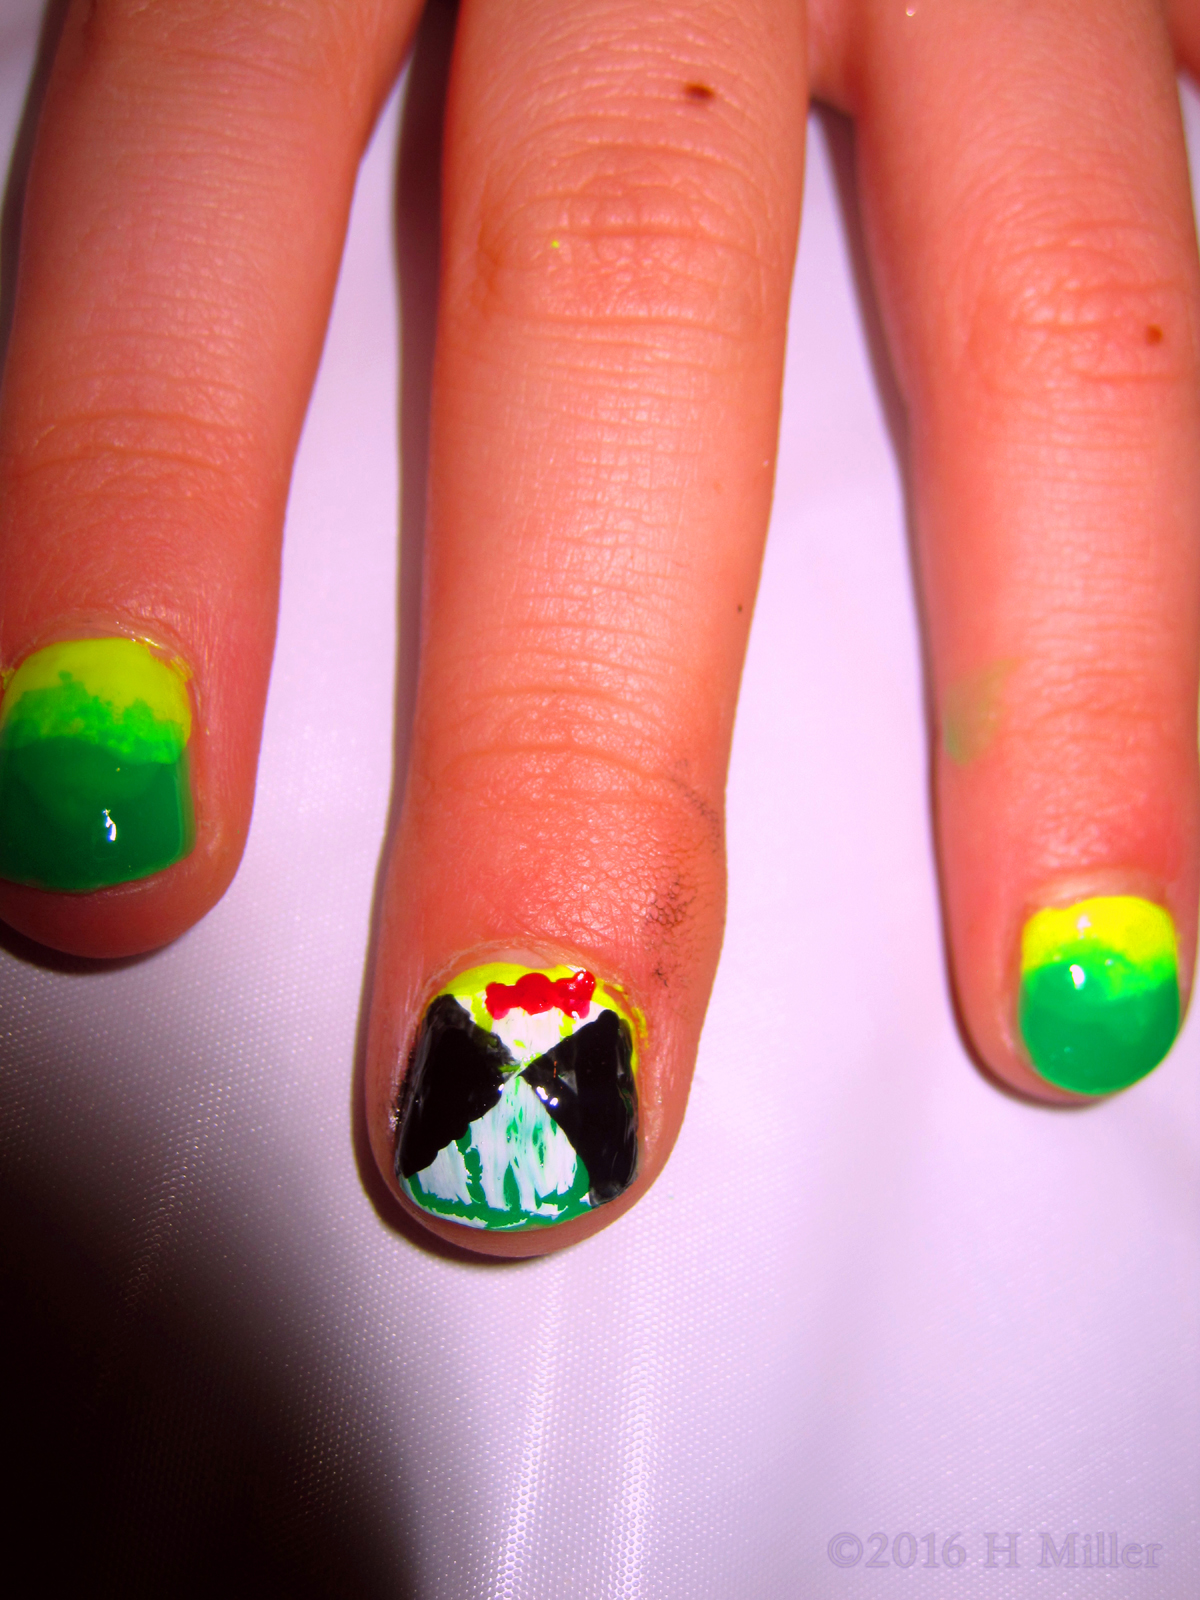 Awesome Tuxedo Nail Art For This Girls Manicure! 